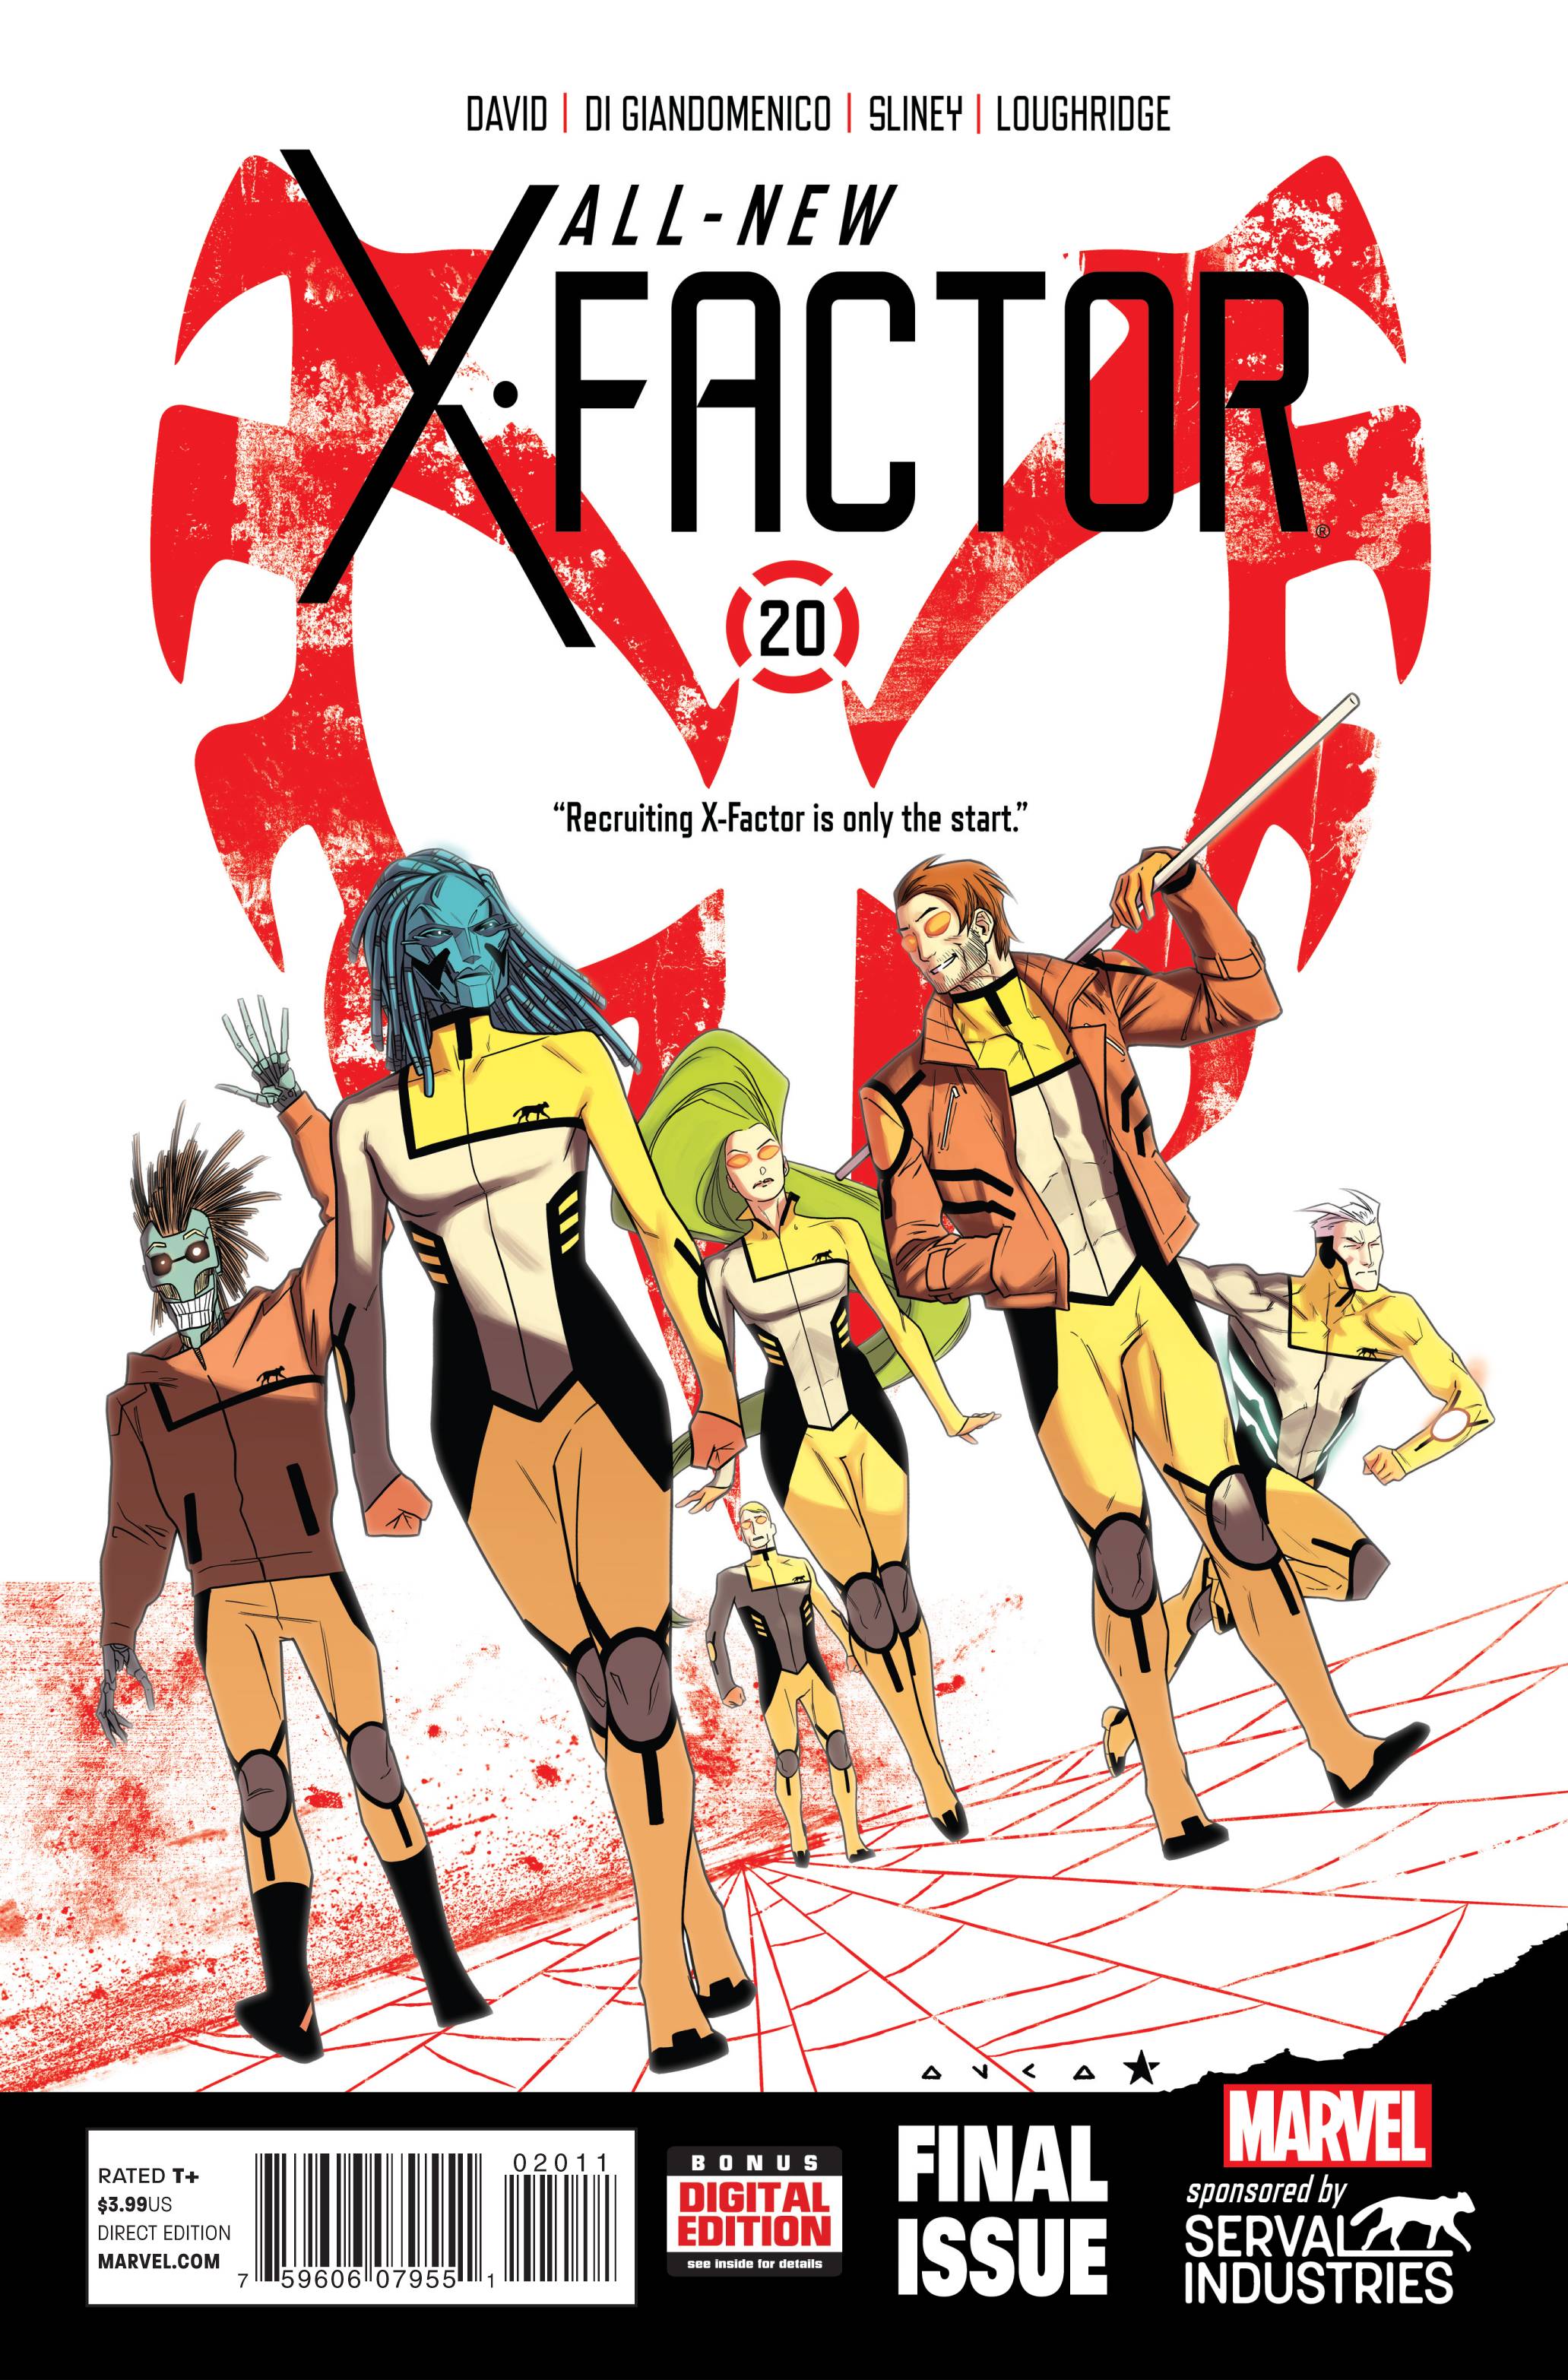 All-New X-Factor #20 (2014)